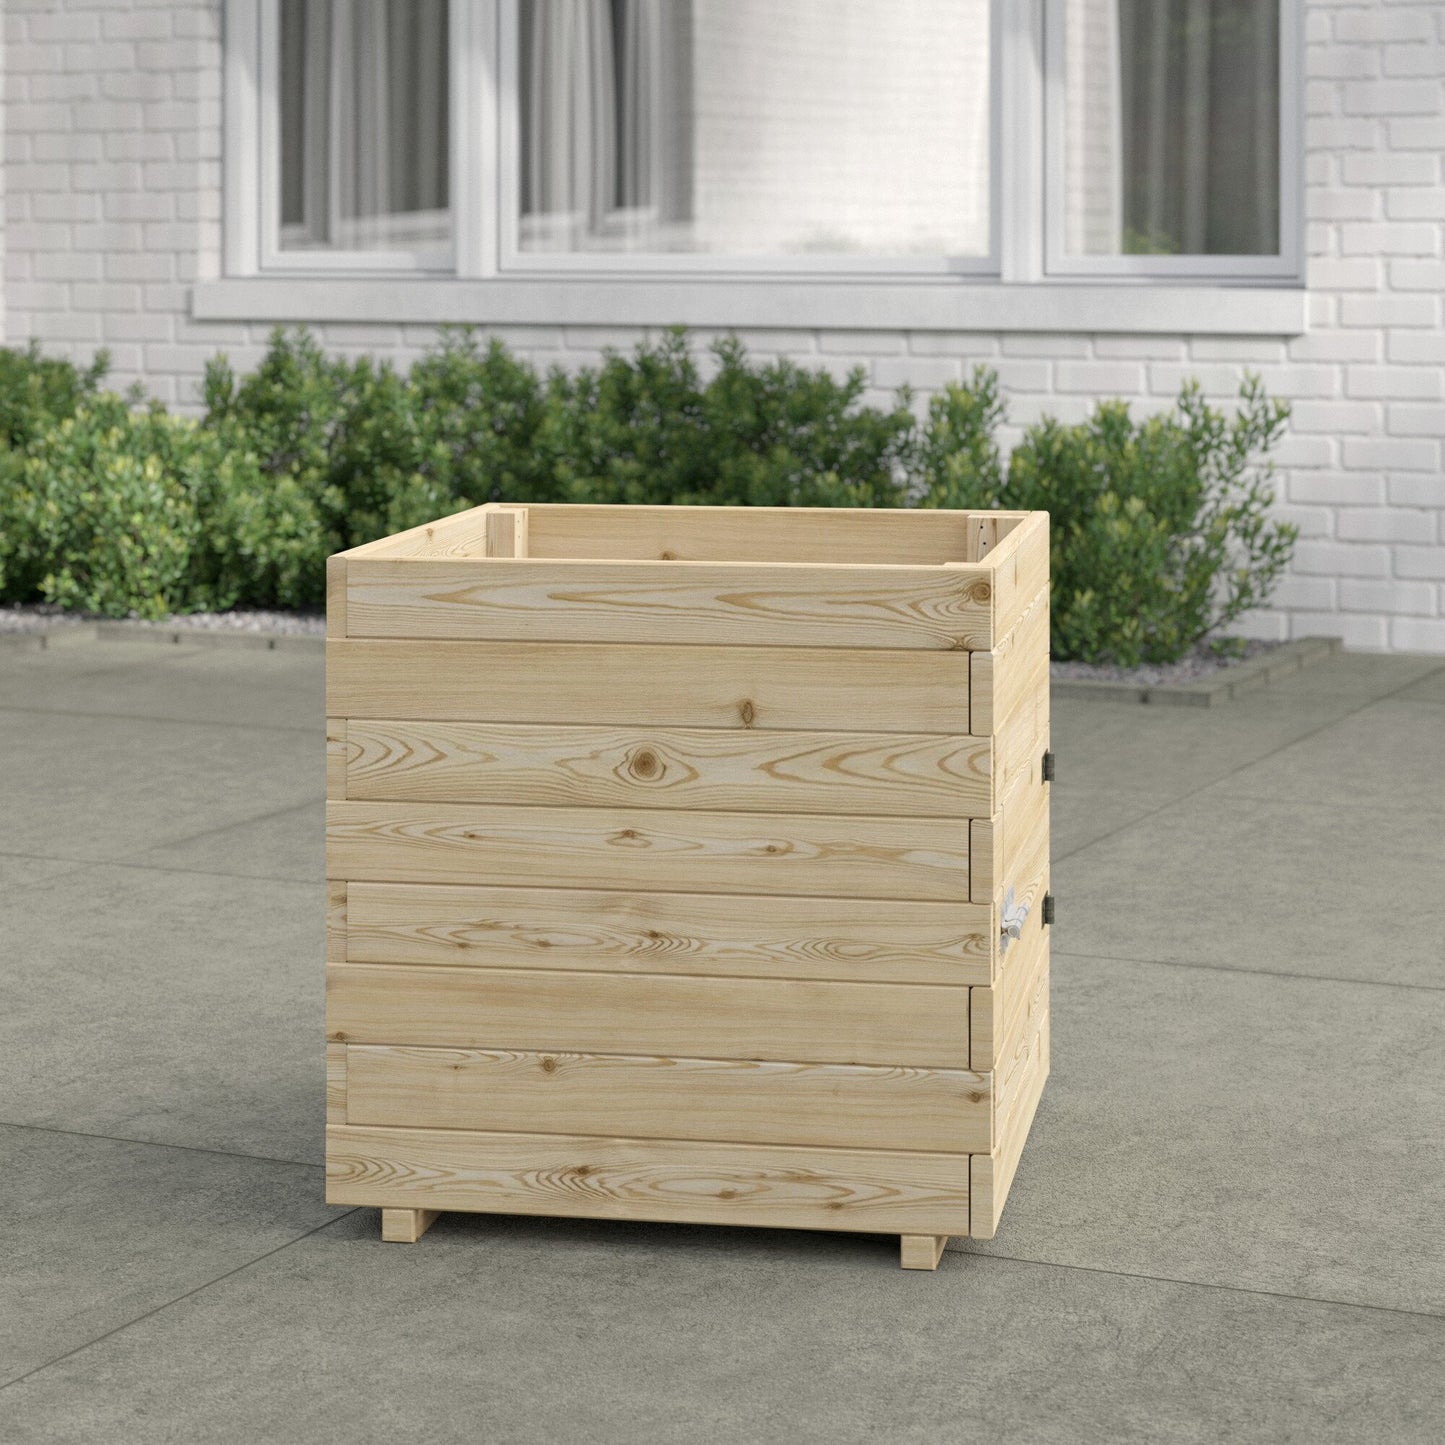 Potato Planters, grow 100's of potato's in a small space with this  lovely wooden planter, wooden potato planter,